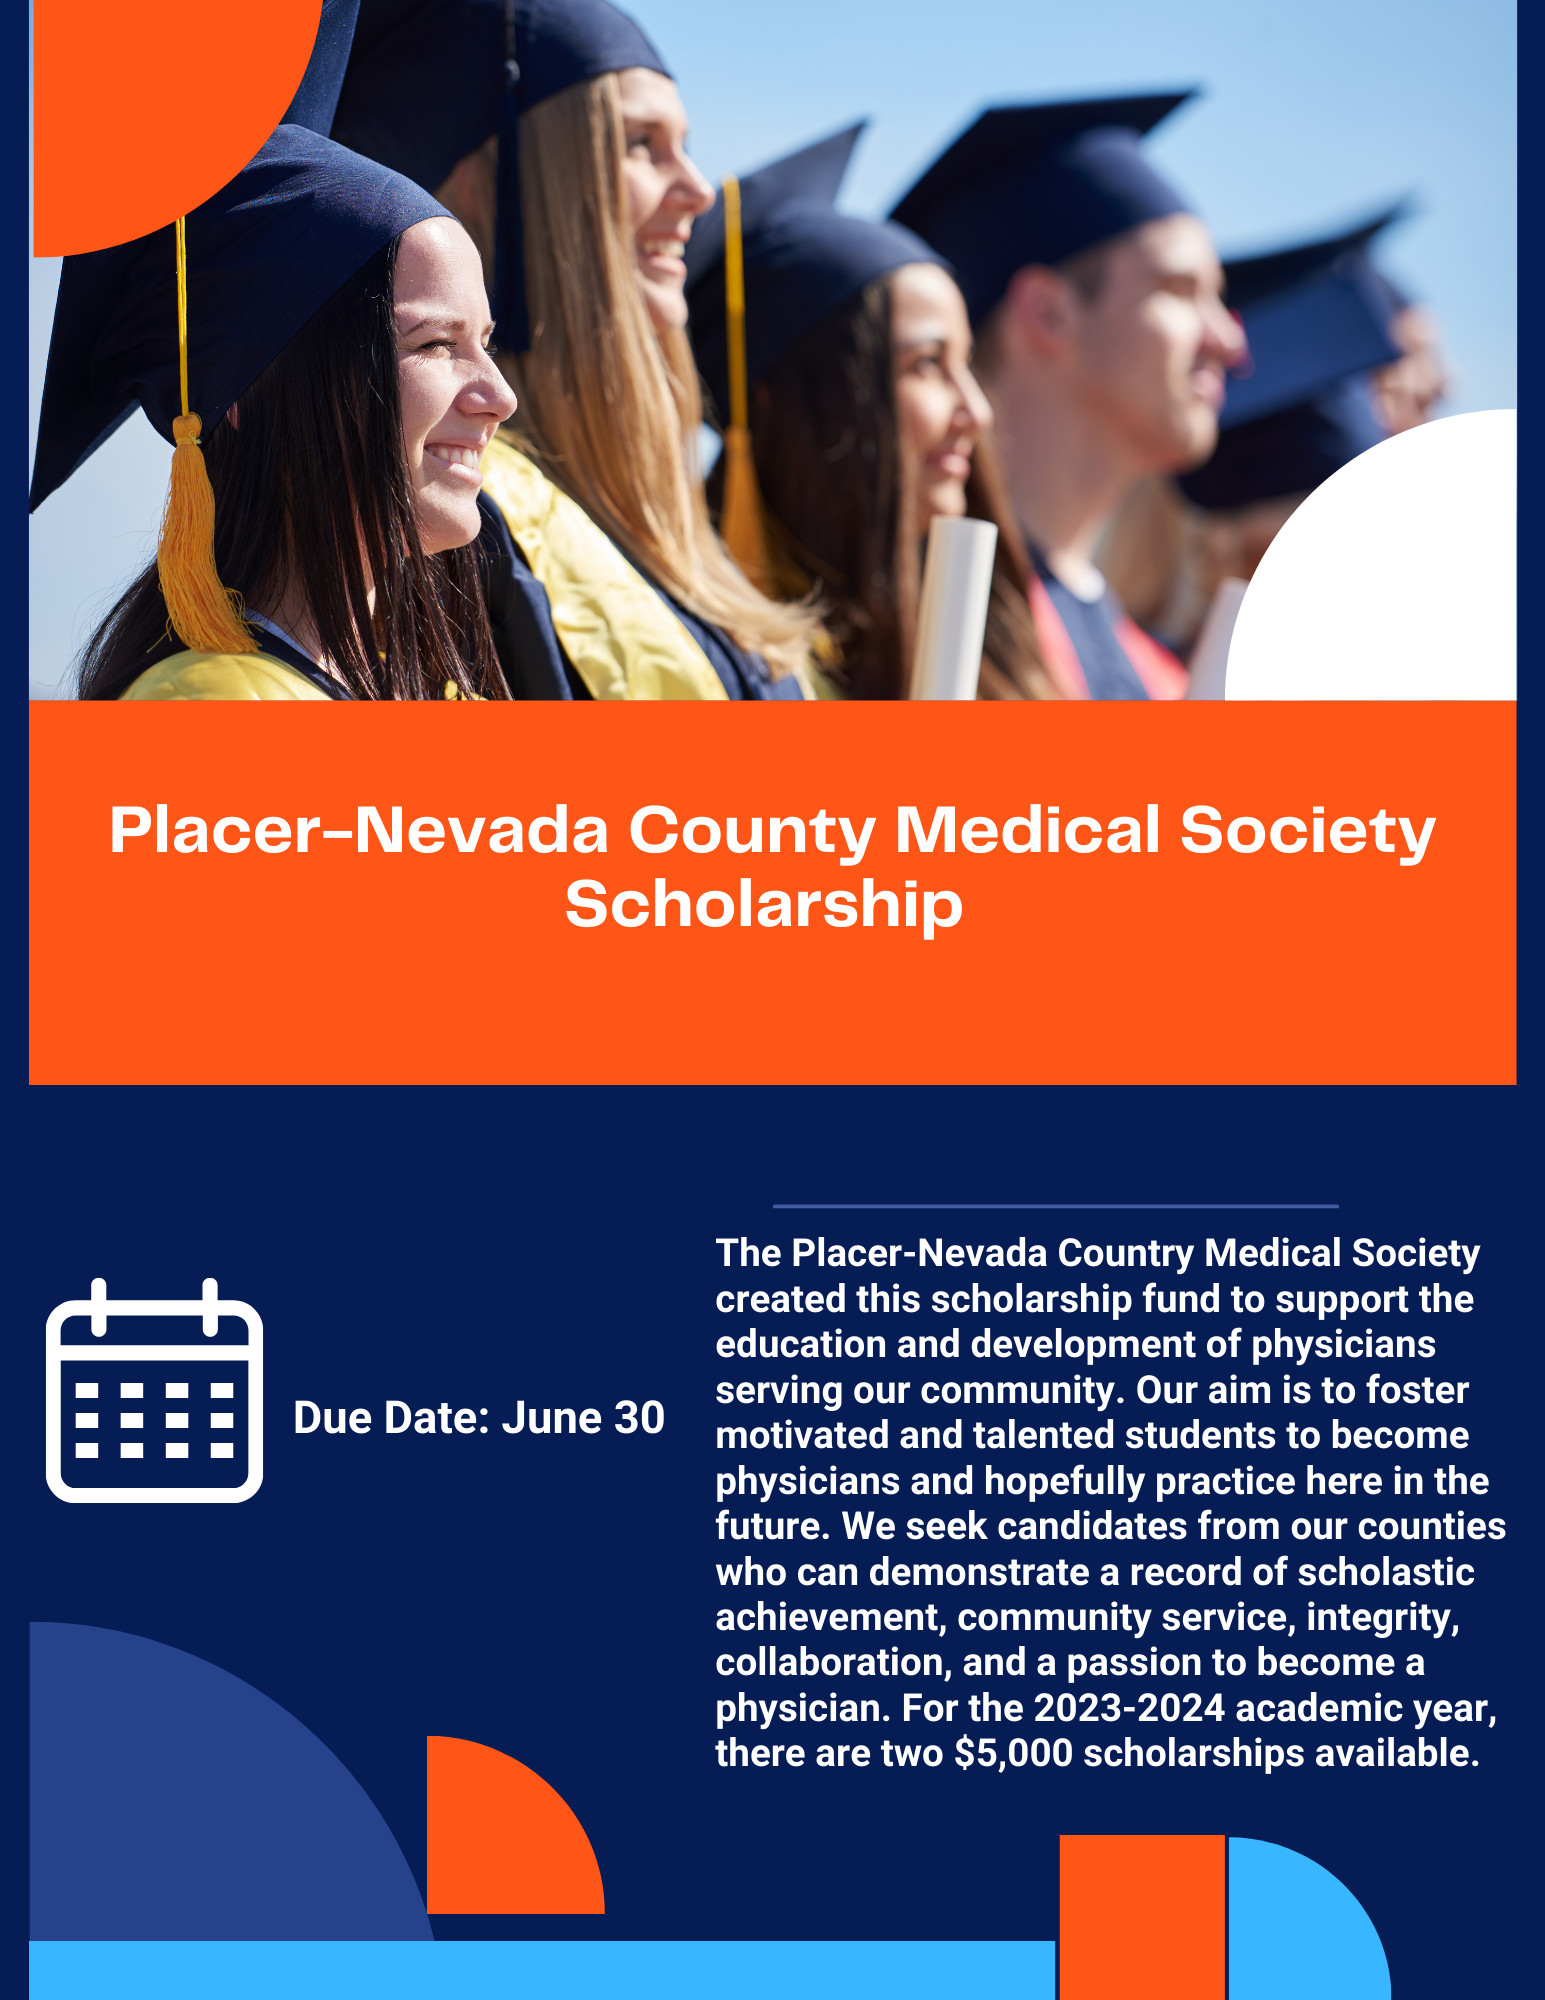 Flyer about PNCMS Scholarship opportunity